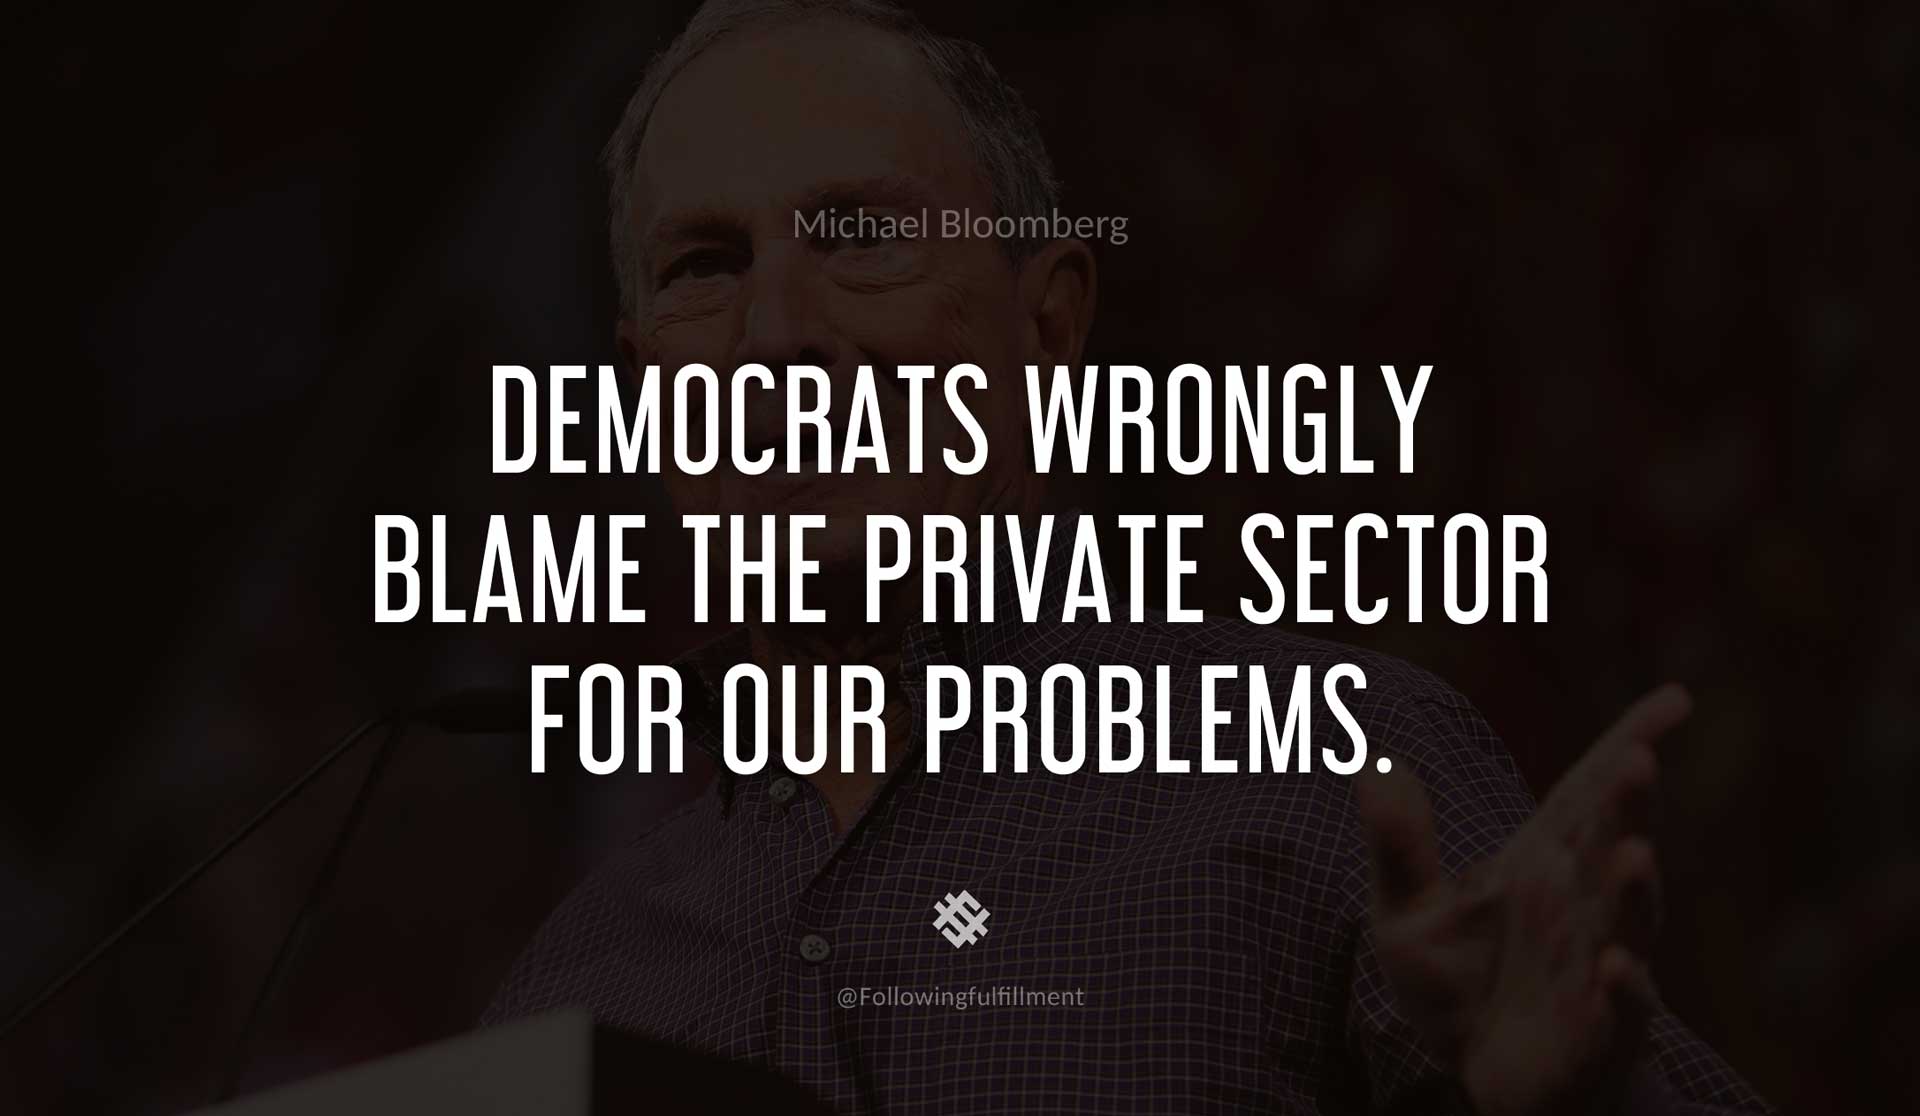 Democrats-wrongly-blame-the-private-sector-for-our-problems.-MICHAEL-BLOOMBERG-Quote.jpg